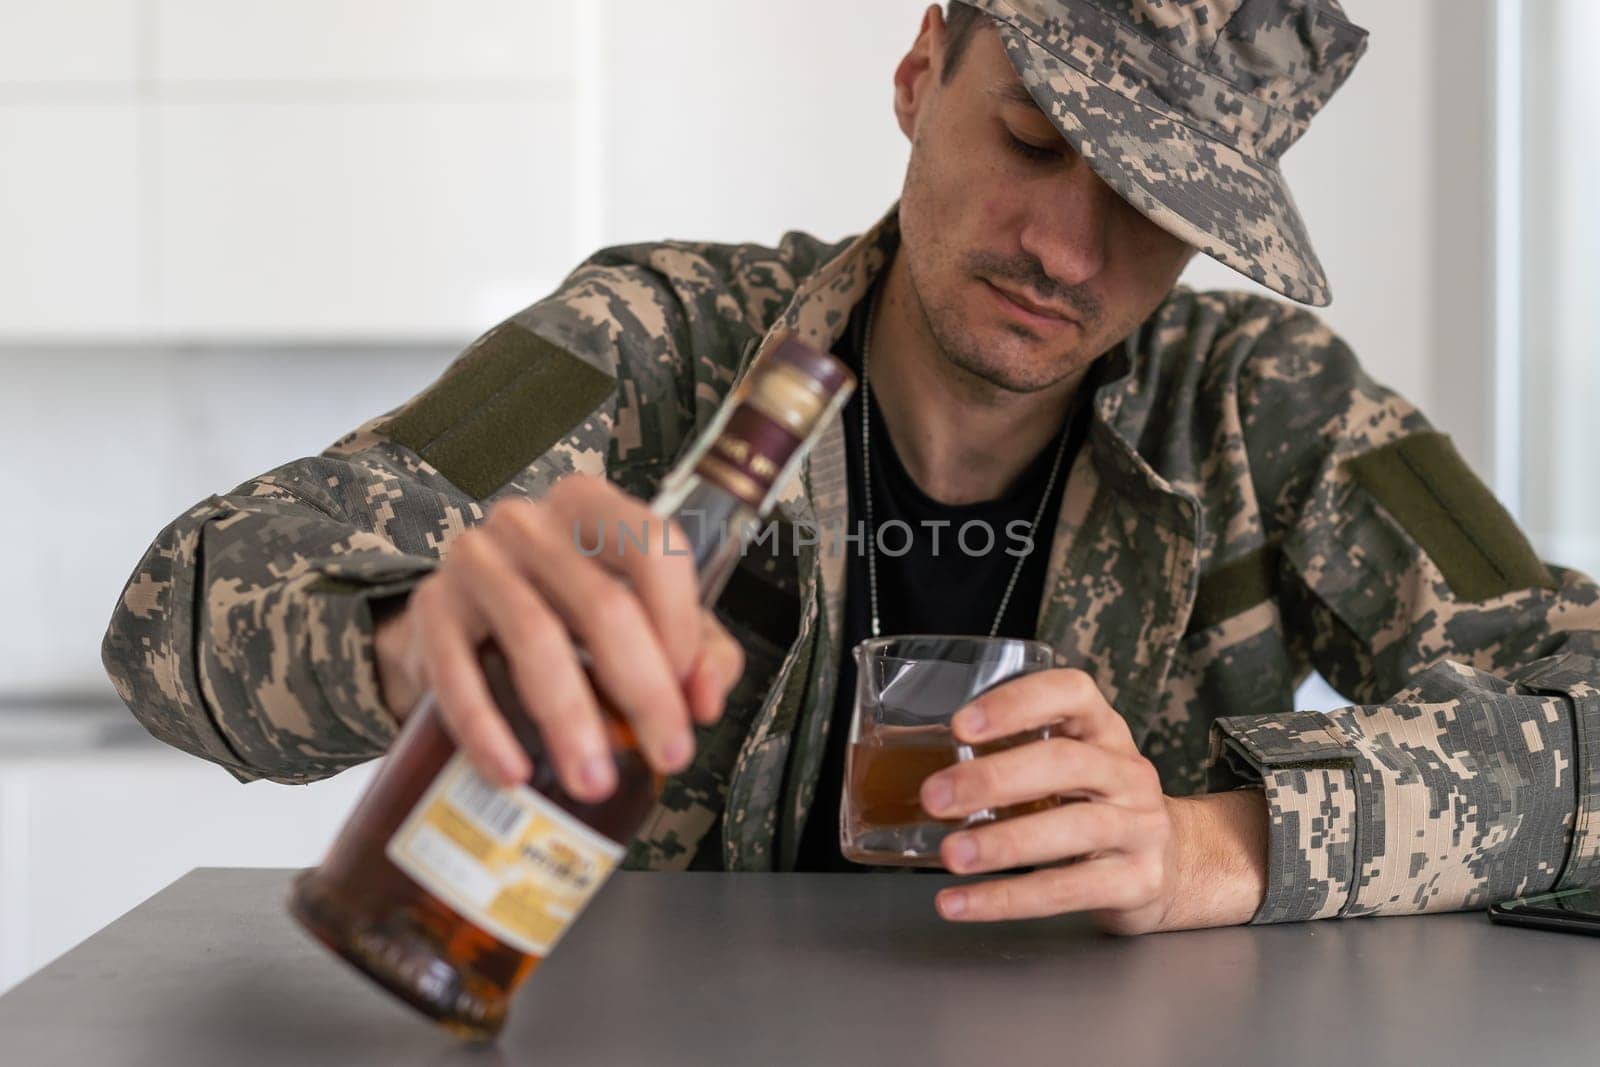 one man sit at home with bottle of liquor drink whiskey drunk alcoholic Alcohol abuse, addiction and man depression concept drink and drive copy space hold car keys by Andelov13